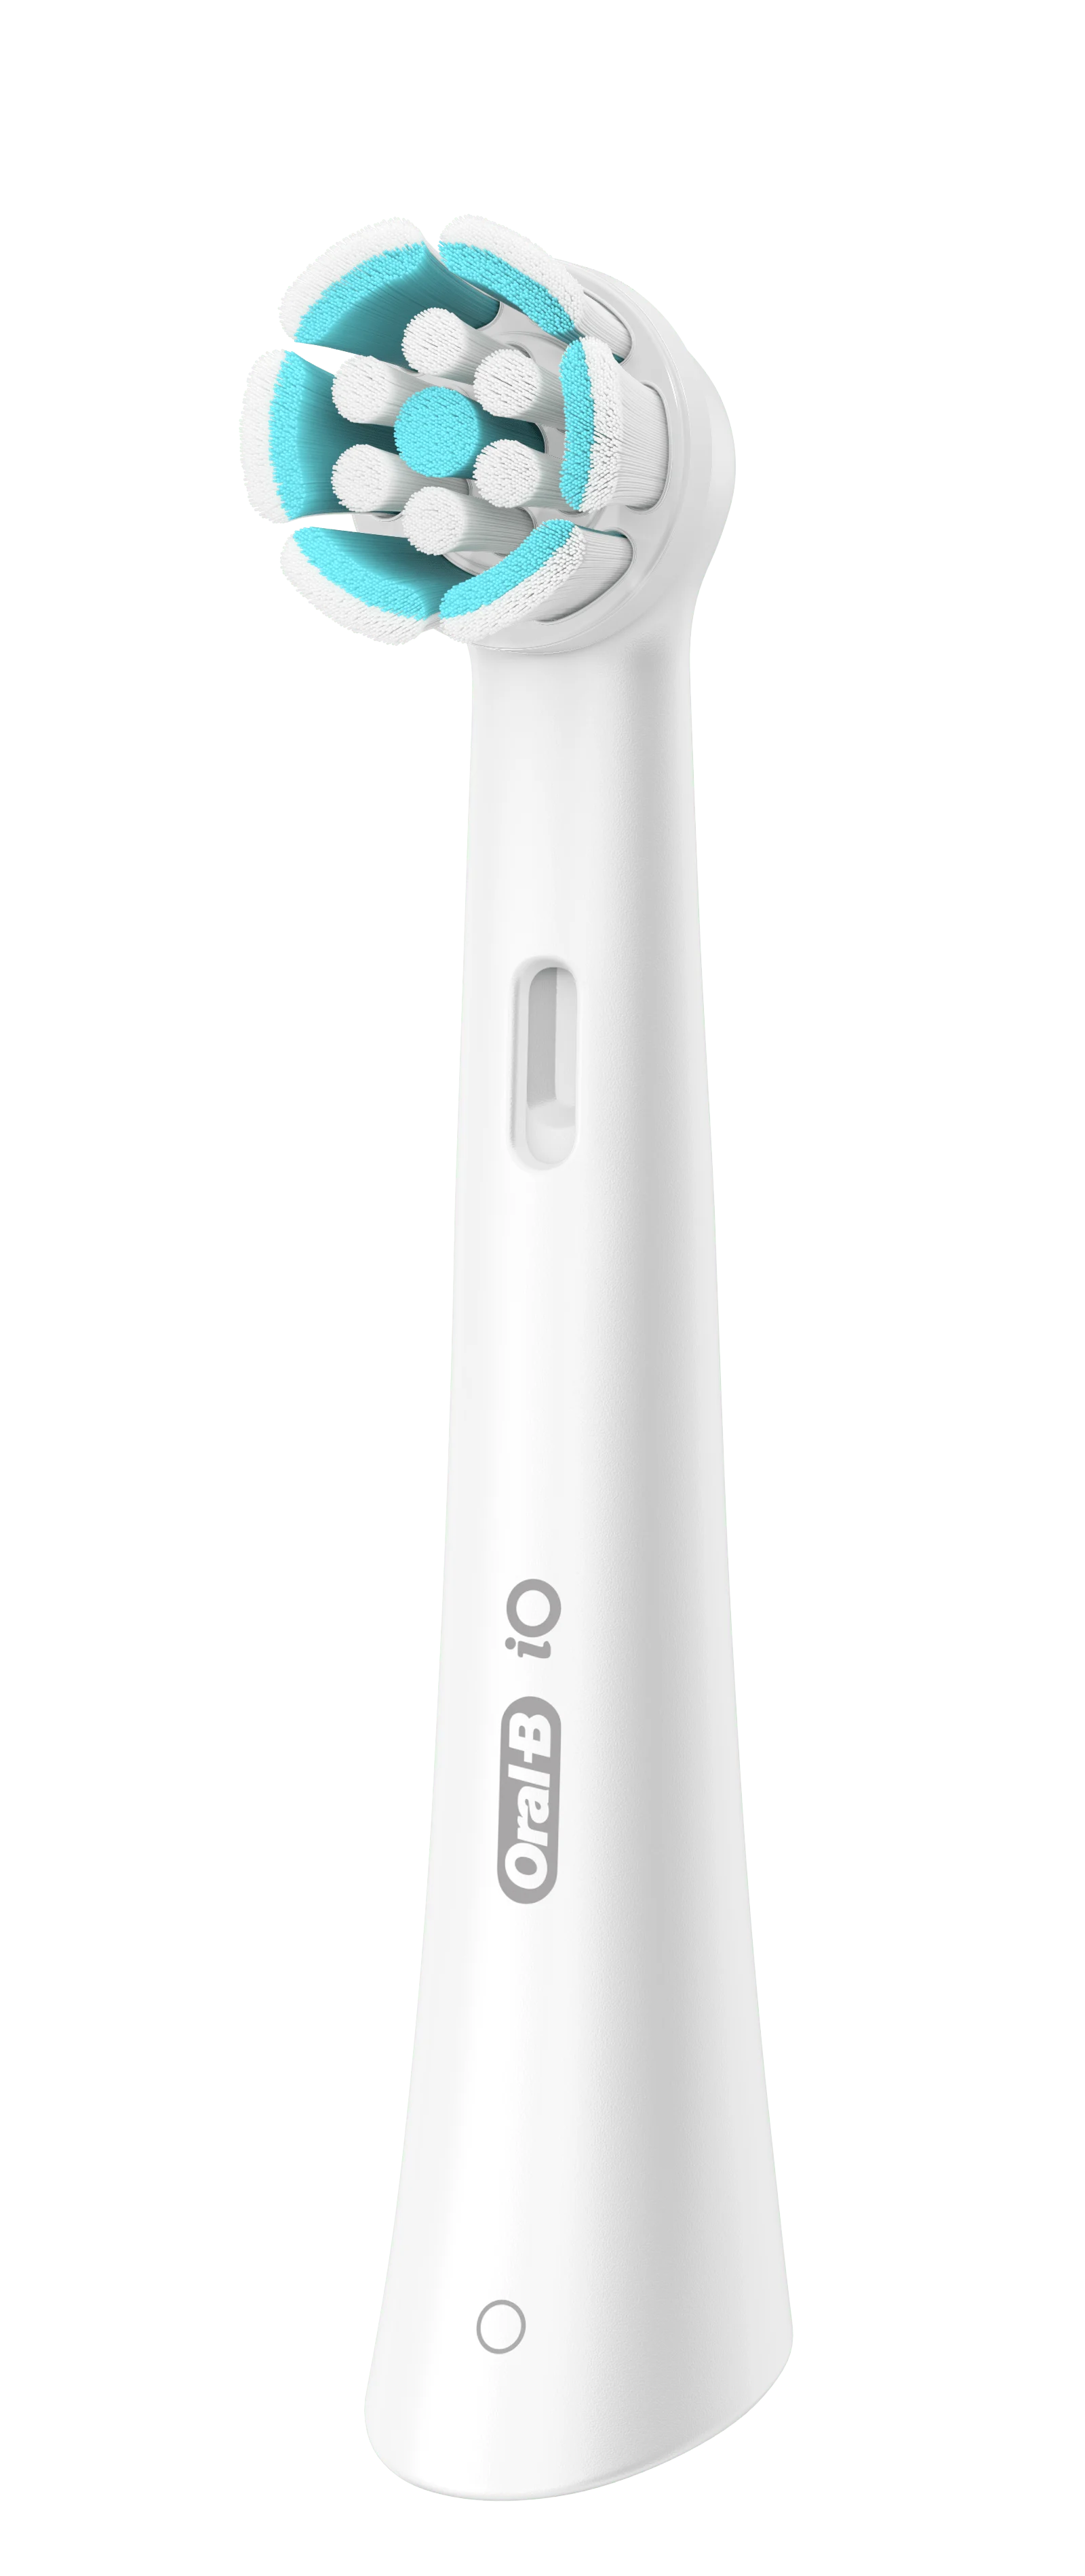 Oral-b iO gentle care 2nd frame